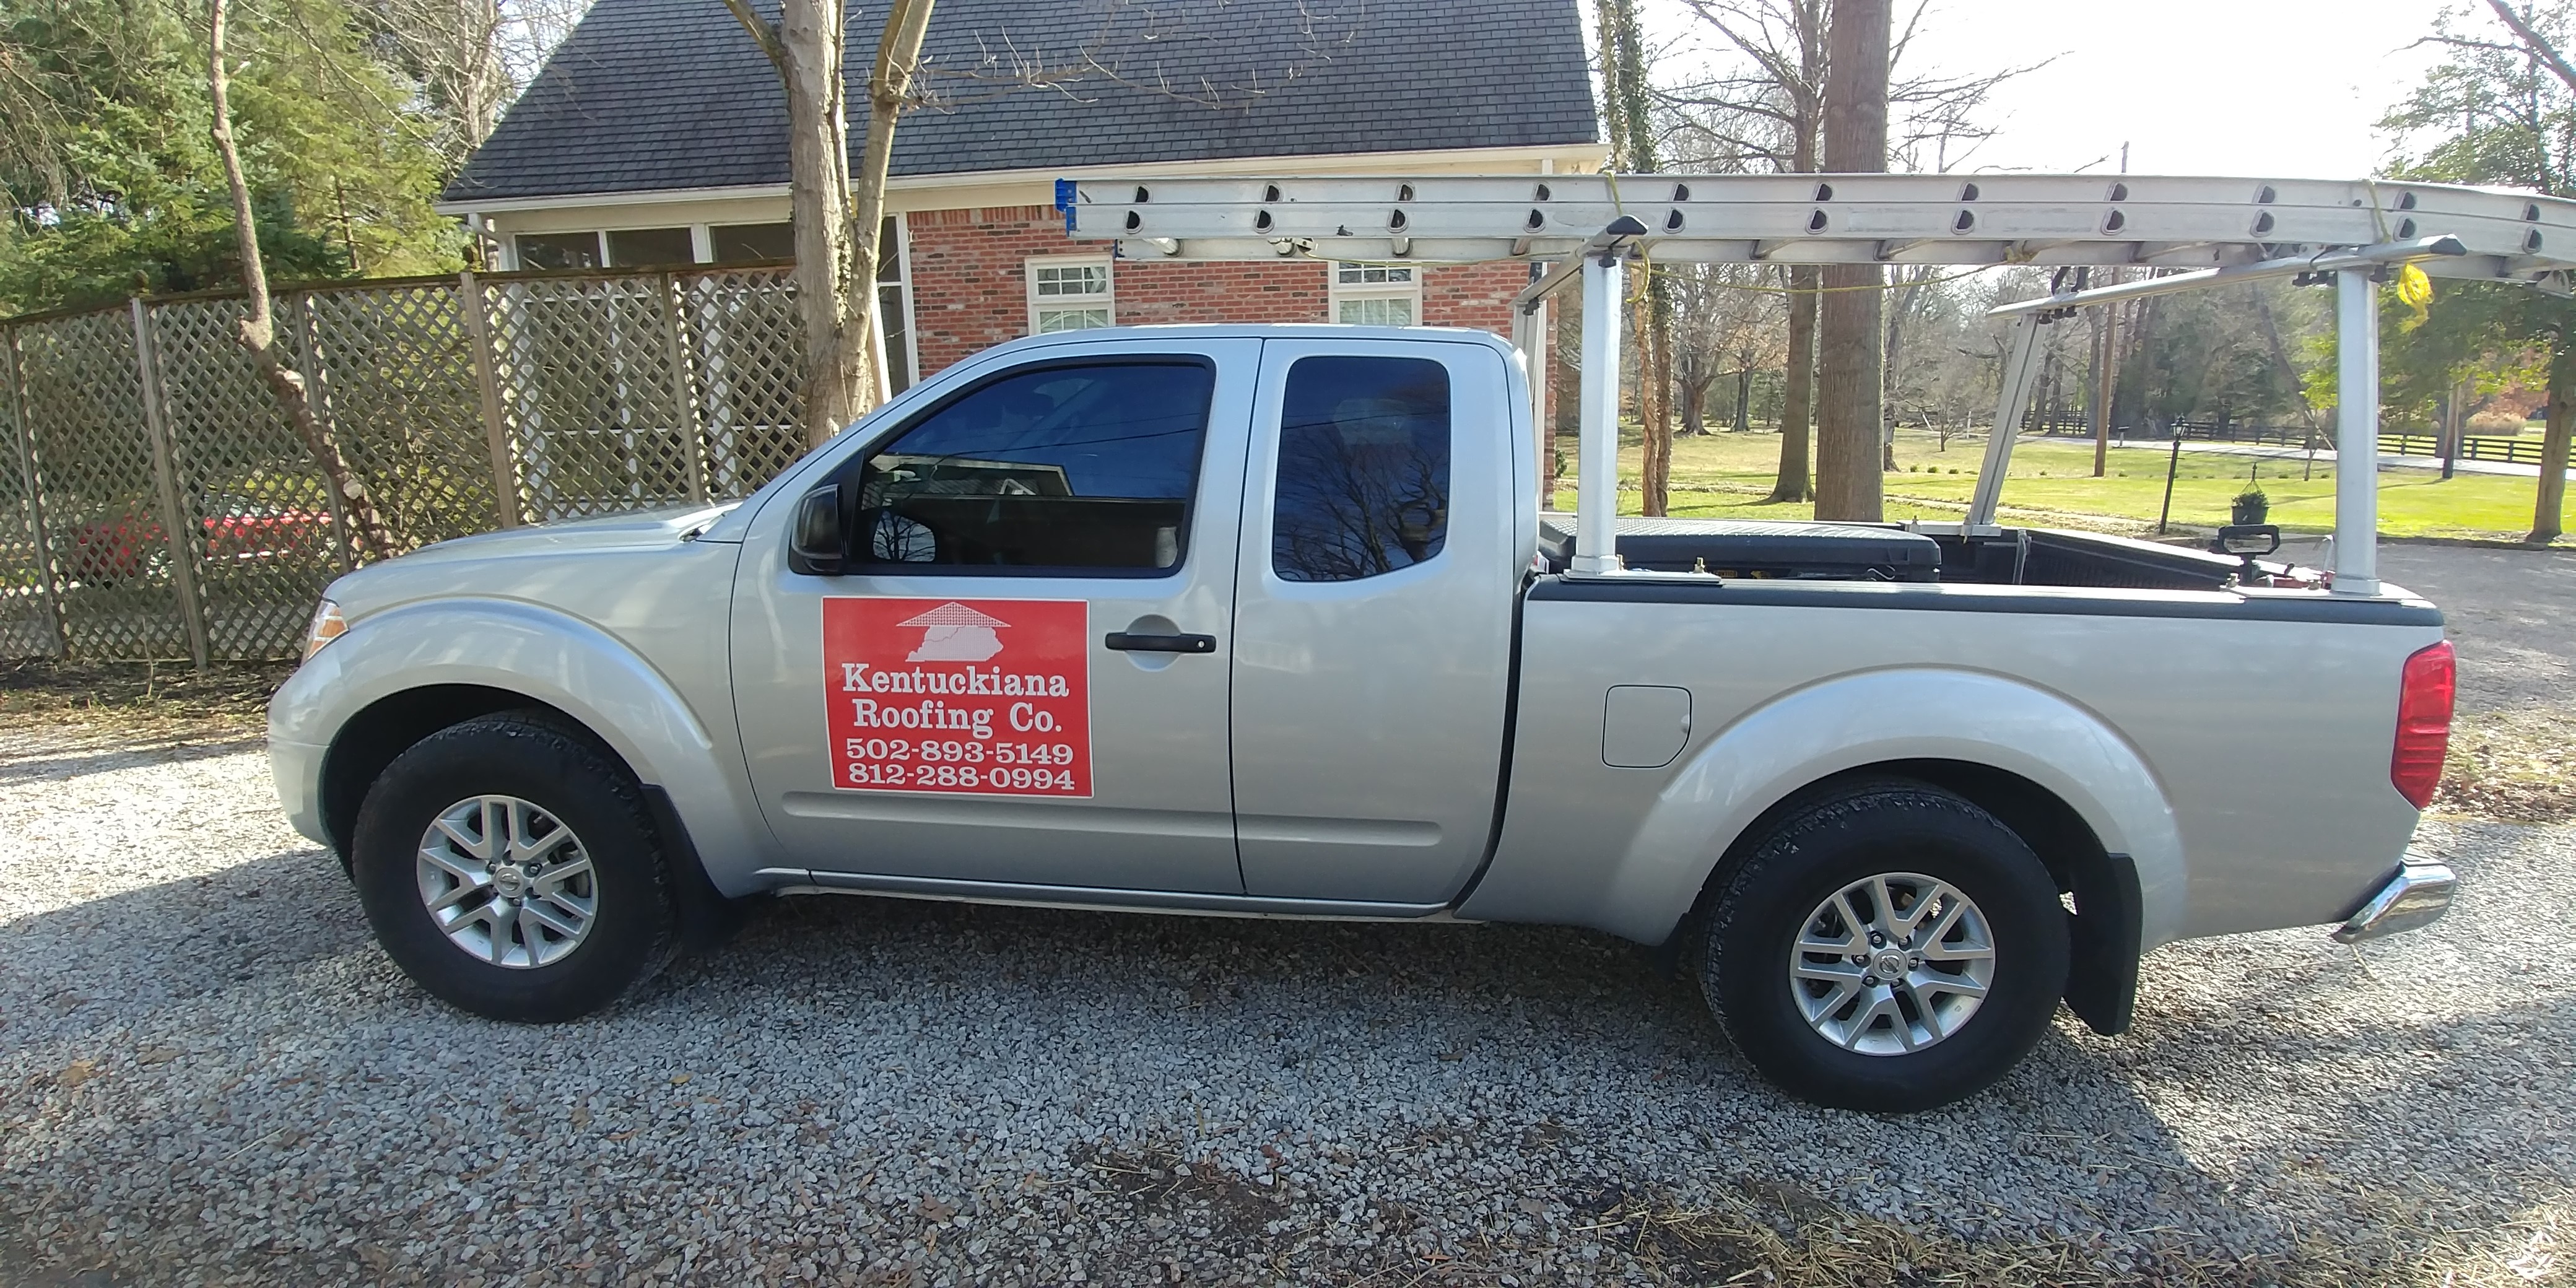 Since 1985, Kentuckiana Roofing, the home of the One Day Roofing System, has been installing shingle Kentuckiana Roofing Louisville (502)893-5149